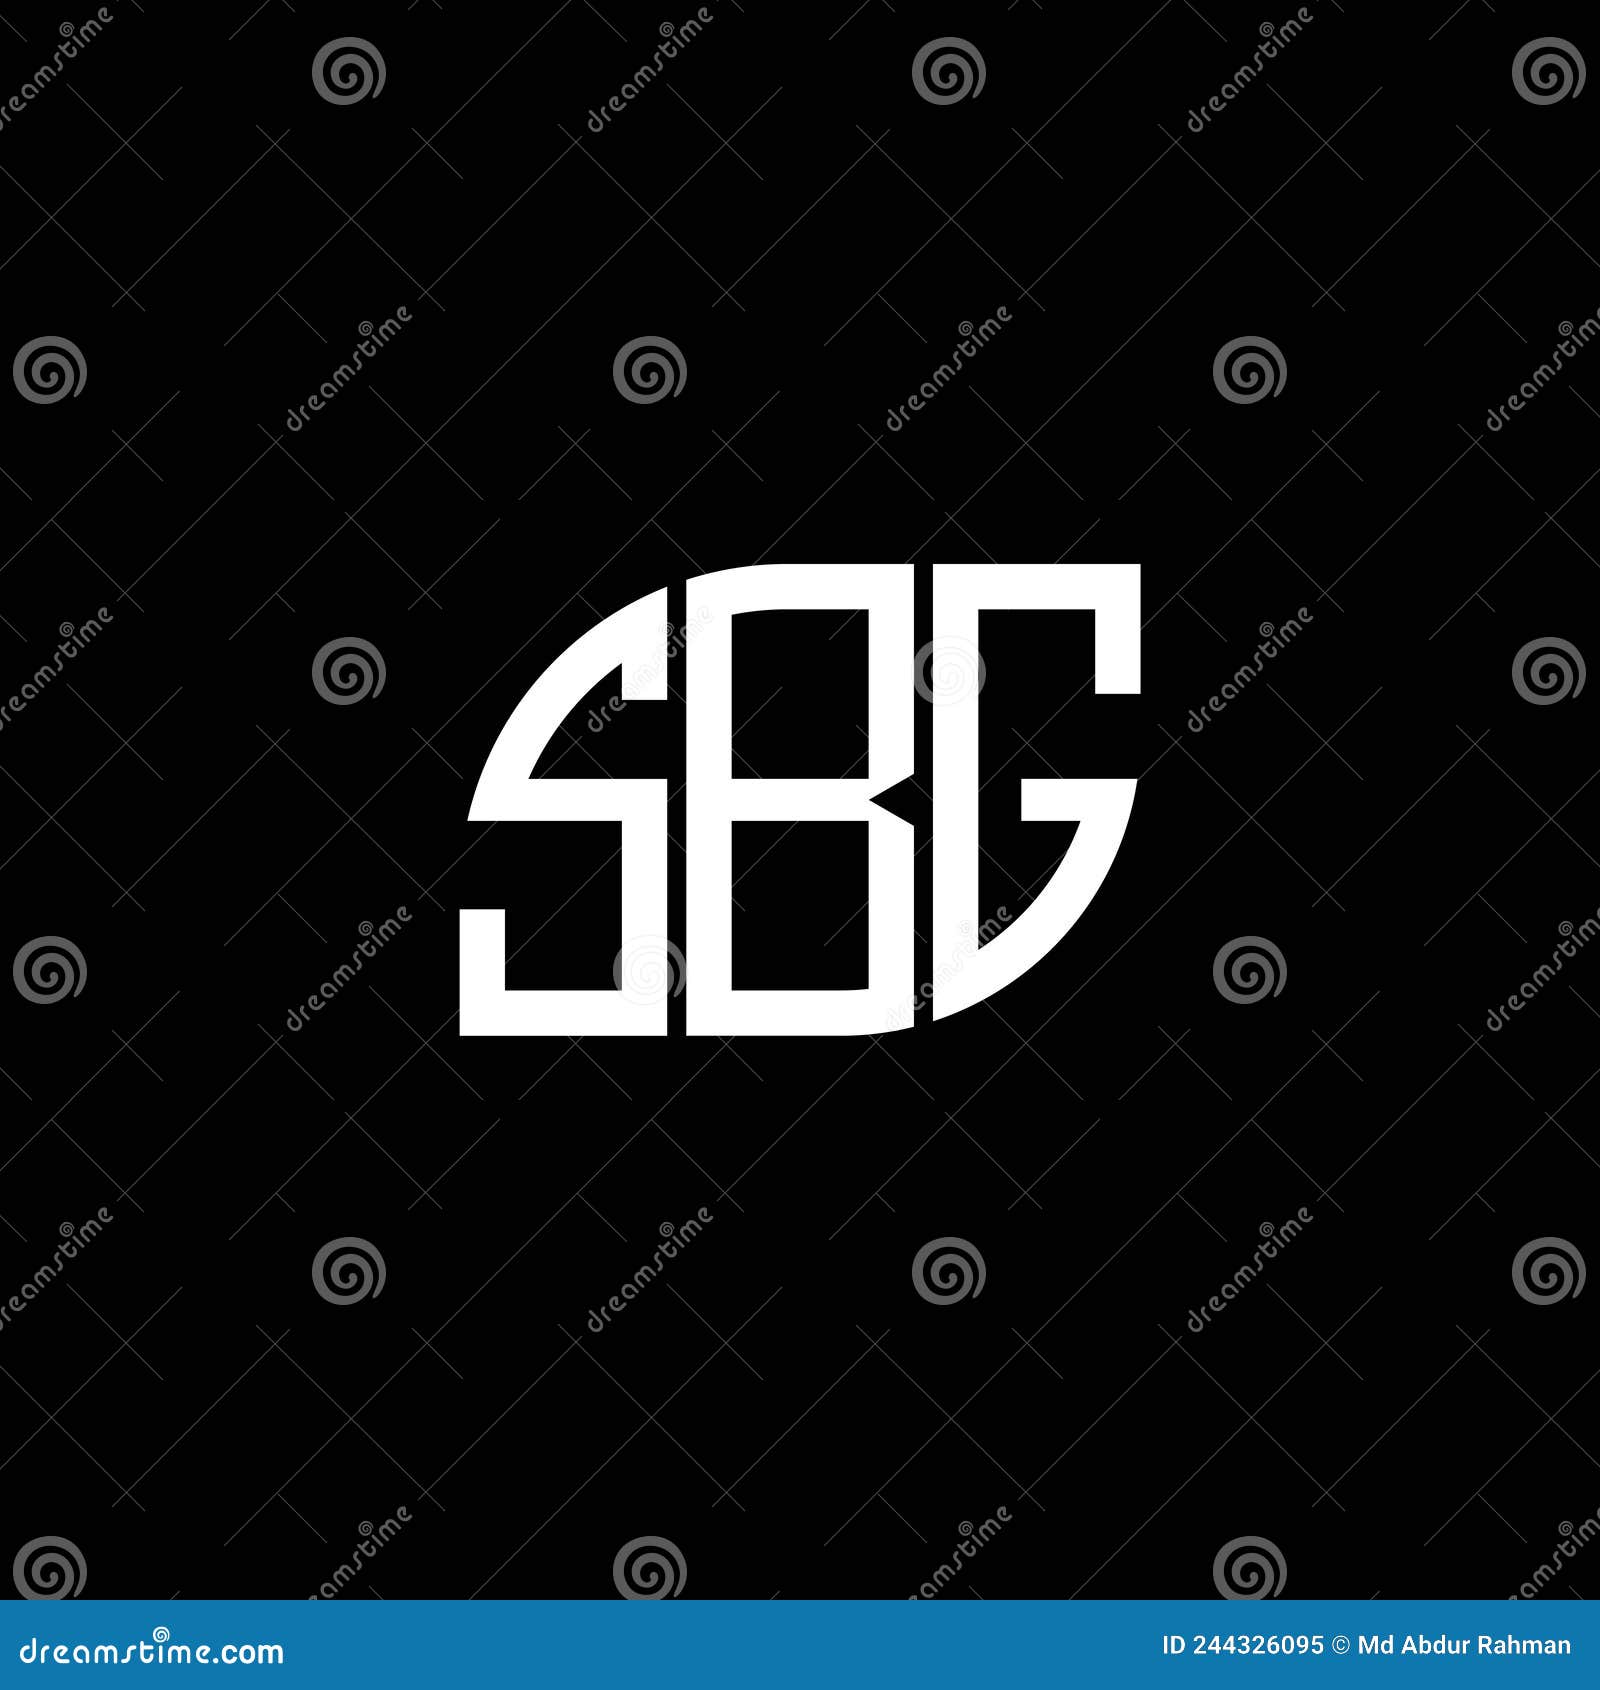 Download SBG Systems Logo PNG and Vector (PDF, SVG, Ai, EPS) Free